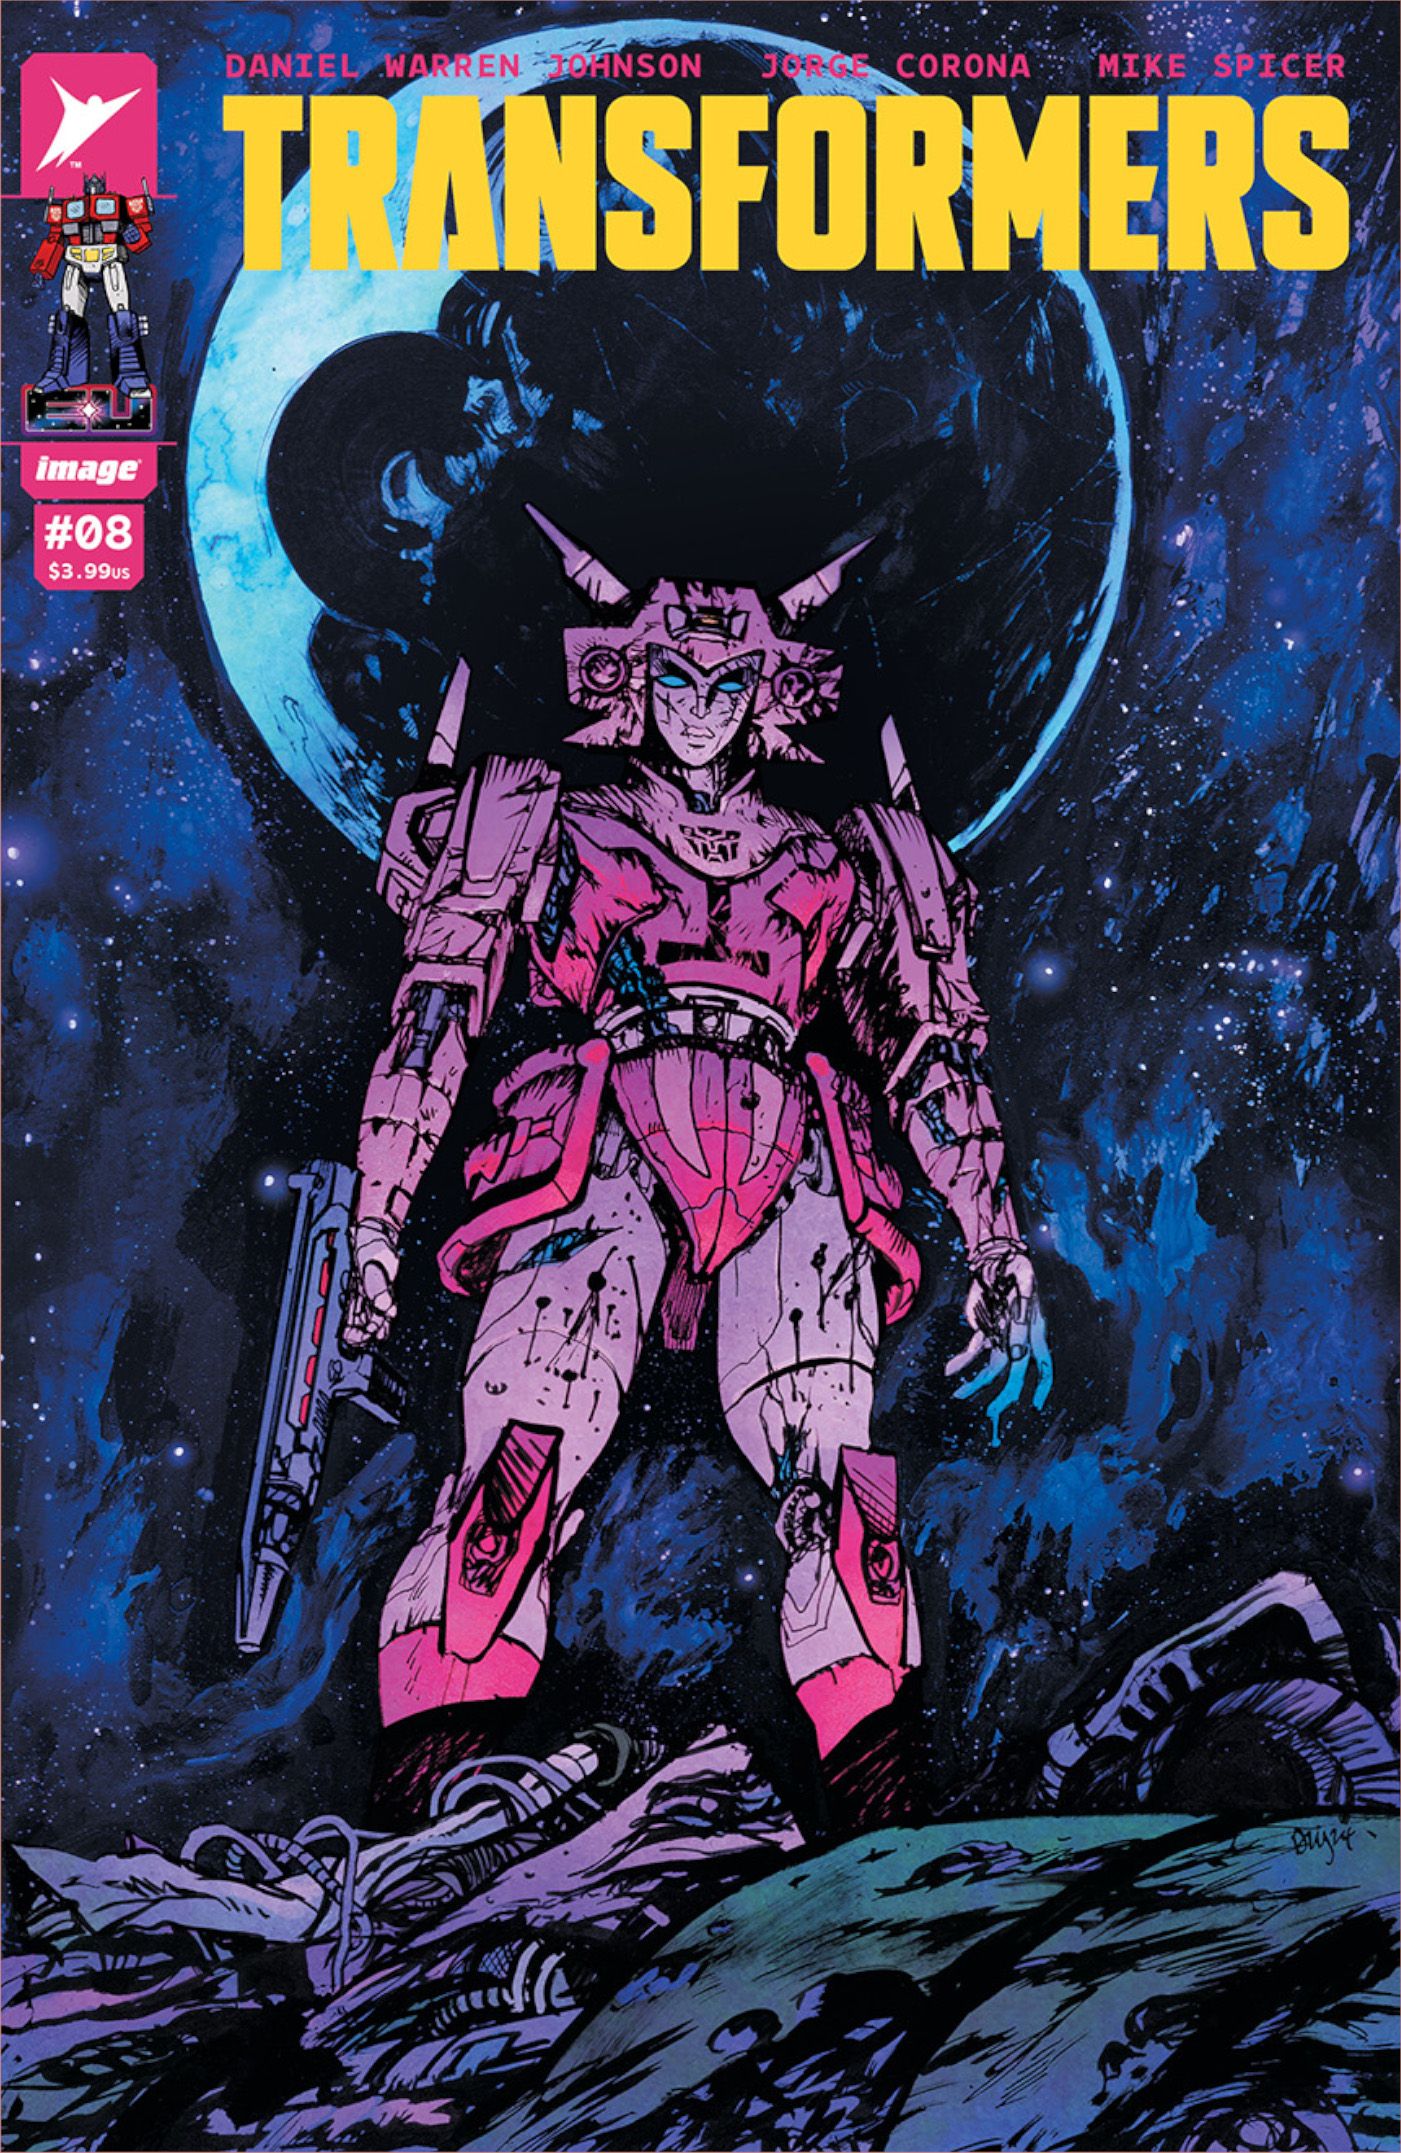 Transformers #8 Cover A by Daniel Warren Johnson, featuring Autobot Arcee standing against a night sky backdrop.